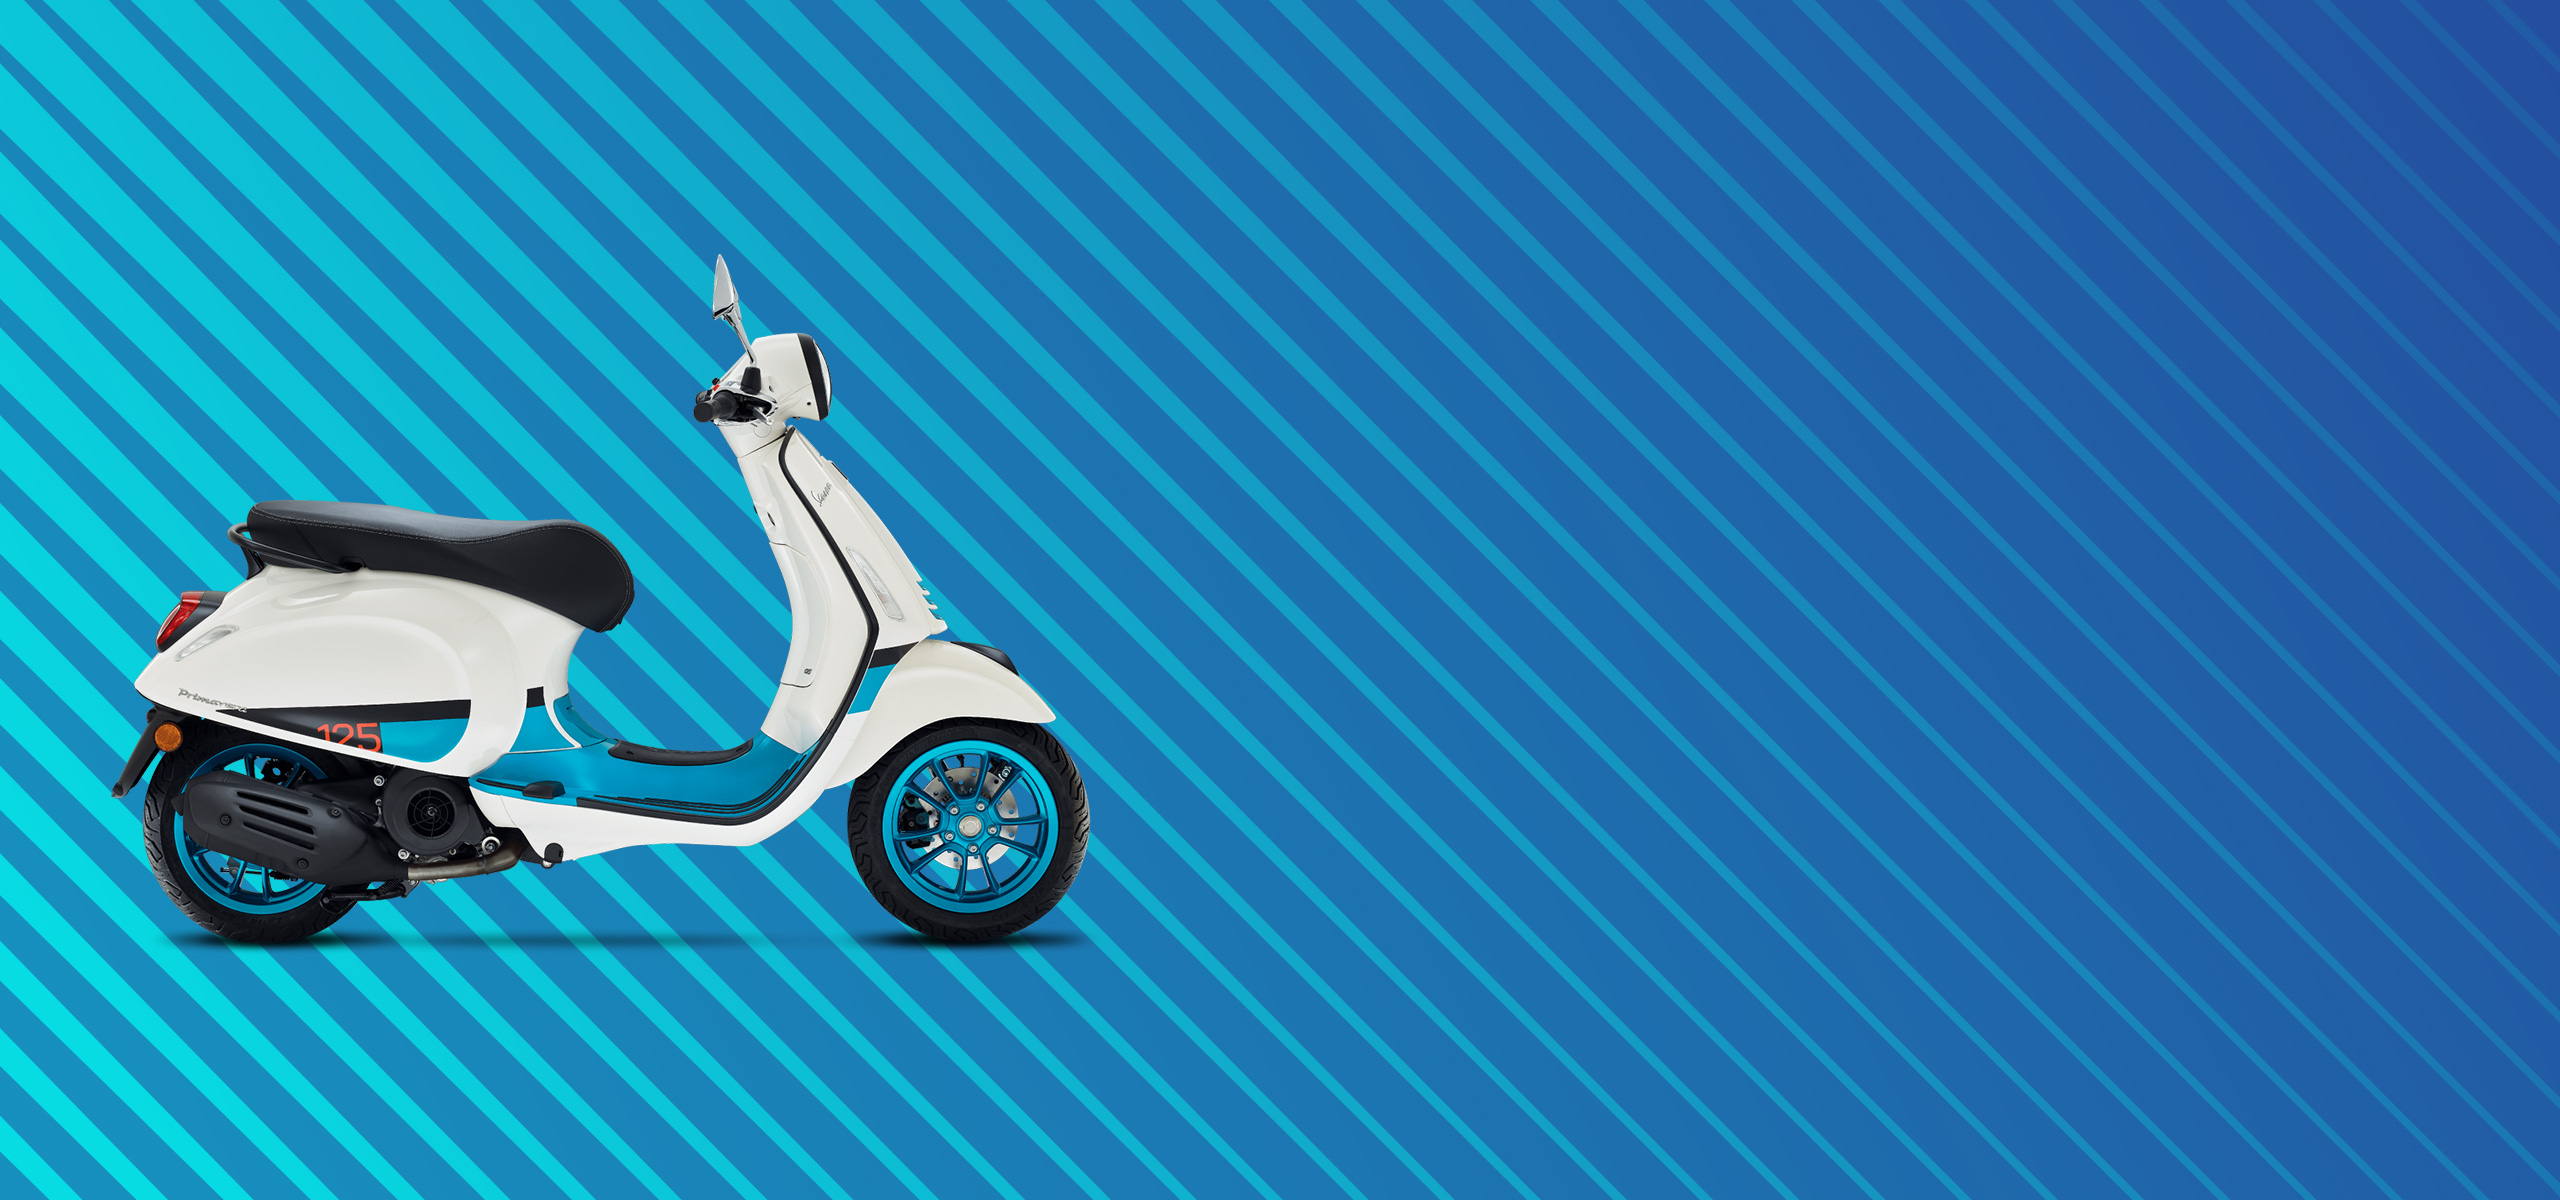 Vespa Primavera 125 Color Vibe available at Frasers Motorcycles